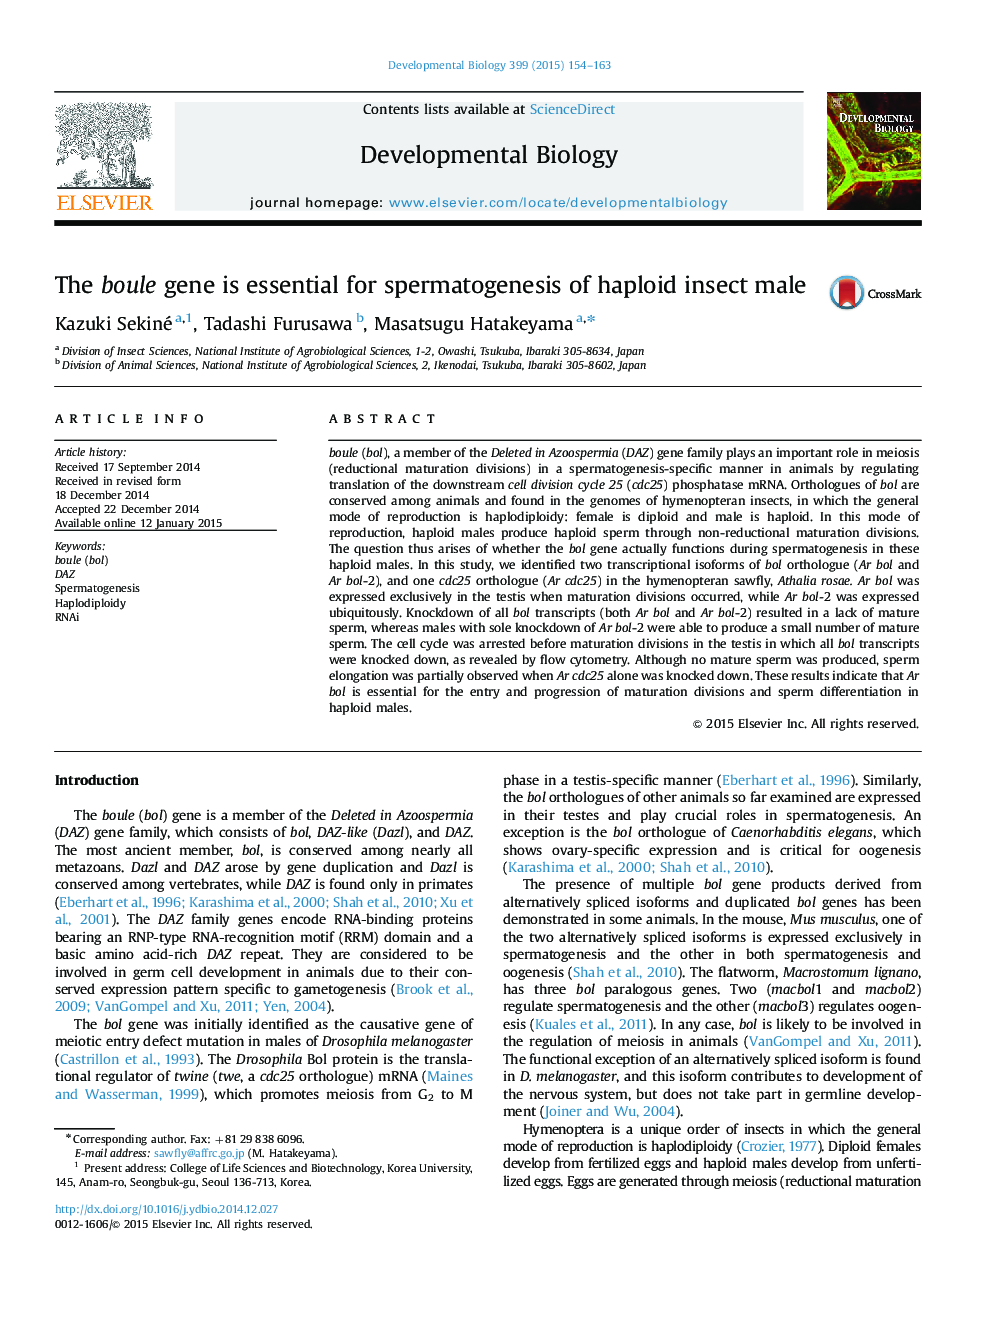 The boule gene is essential for spermatogenesis of haploid insect male